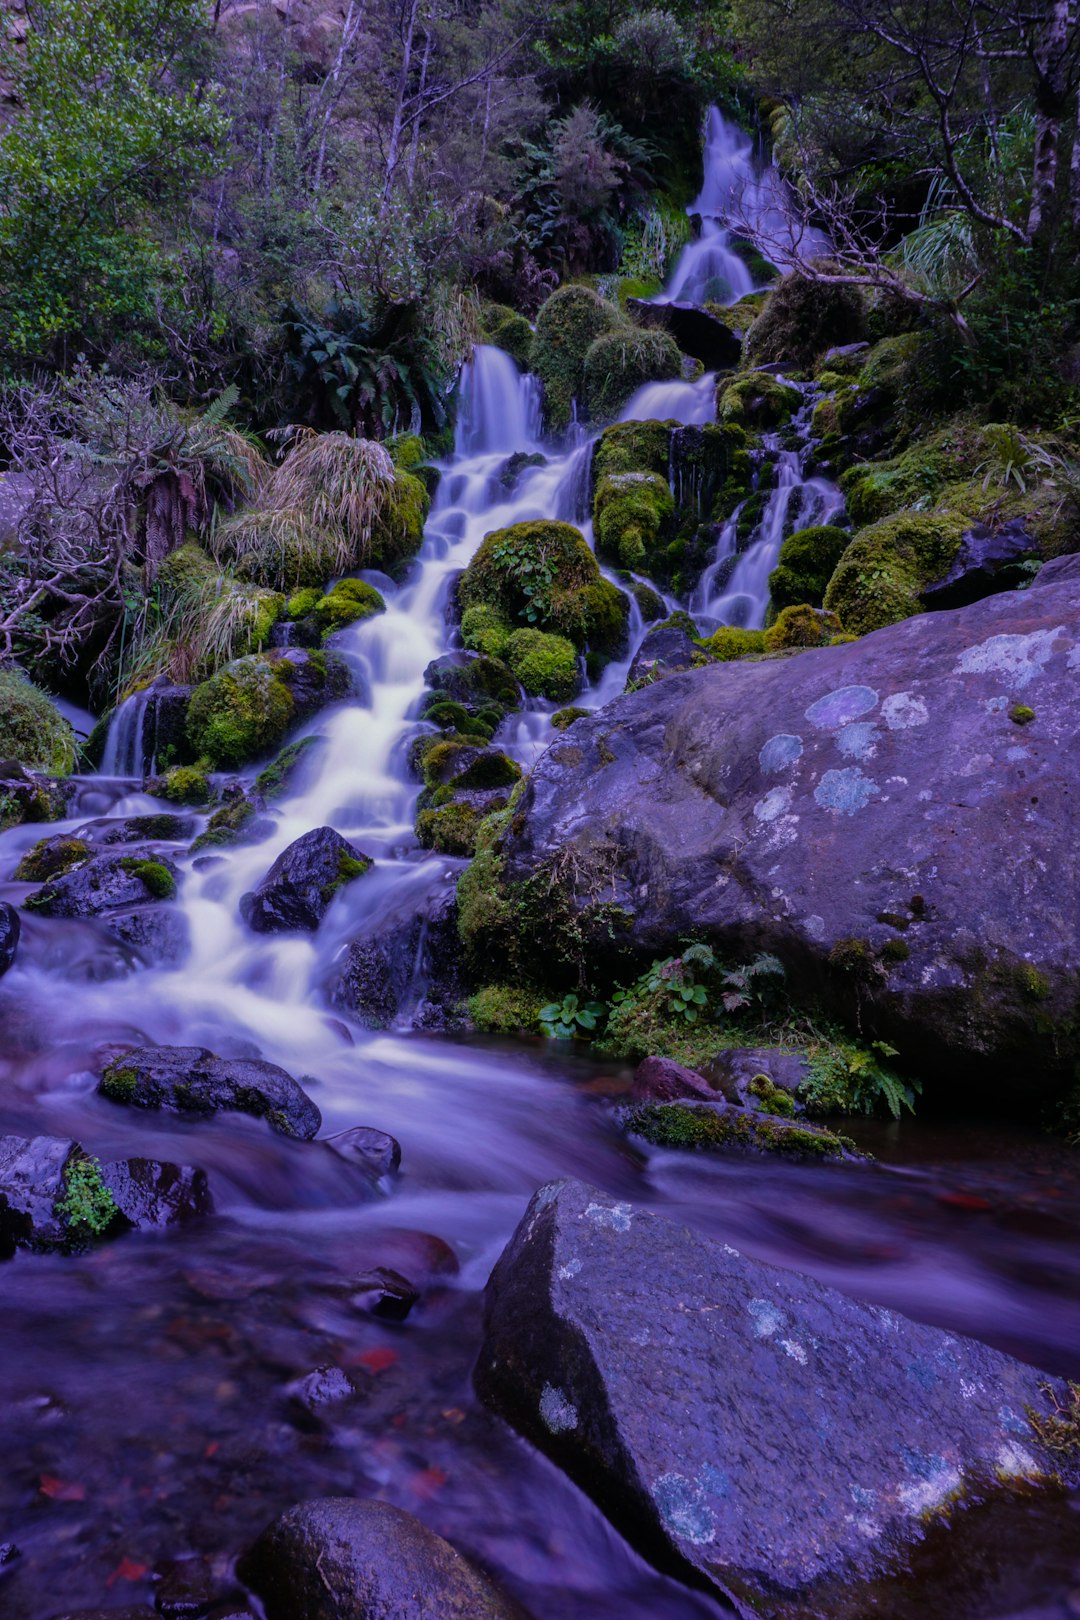 travelers stories about Stream in Tongariro National Park, New Zealand